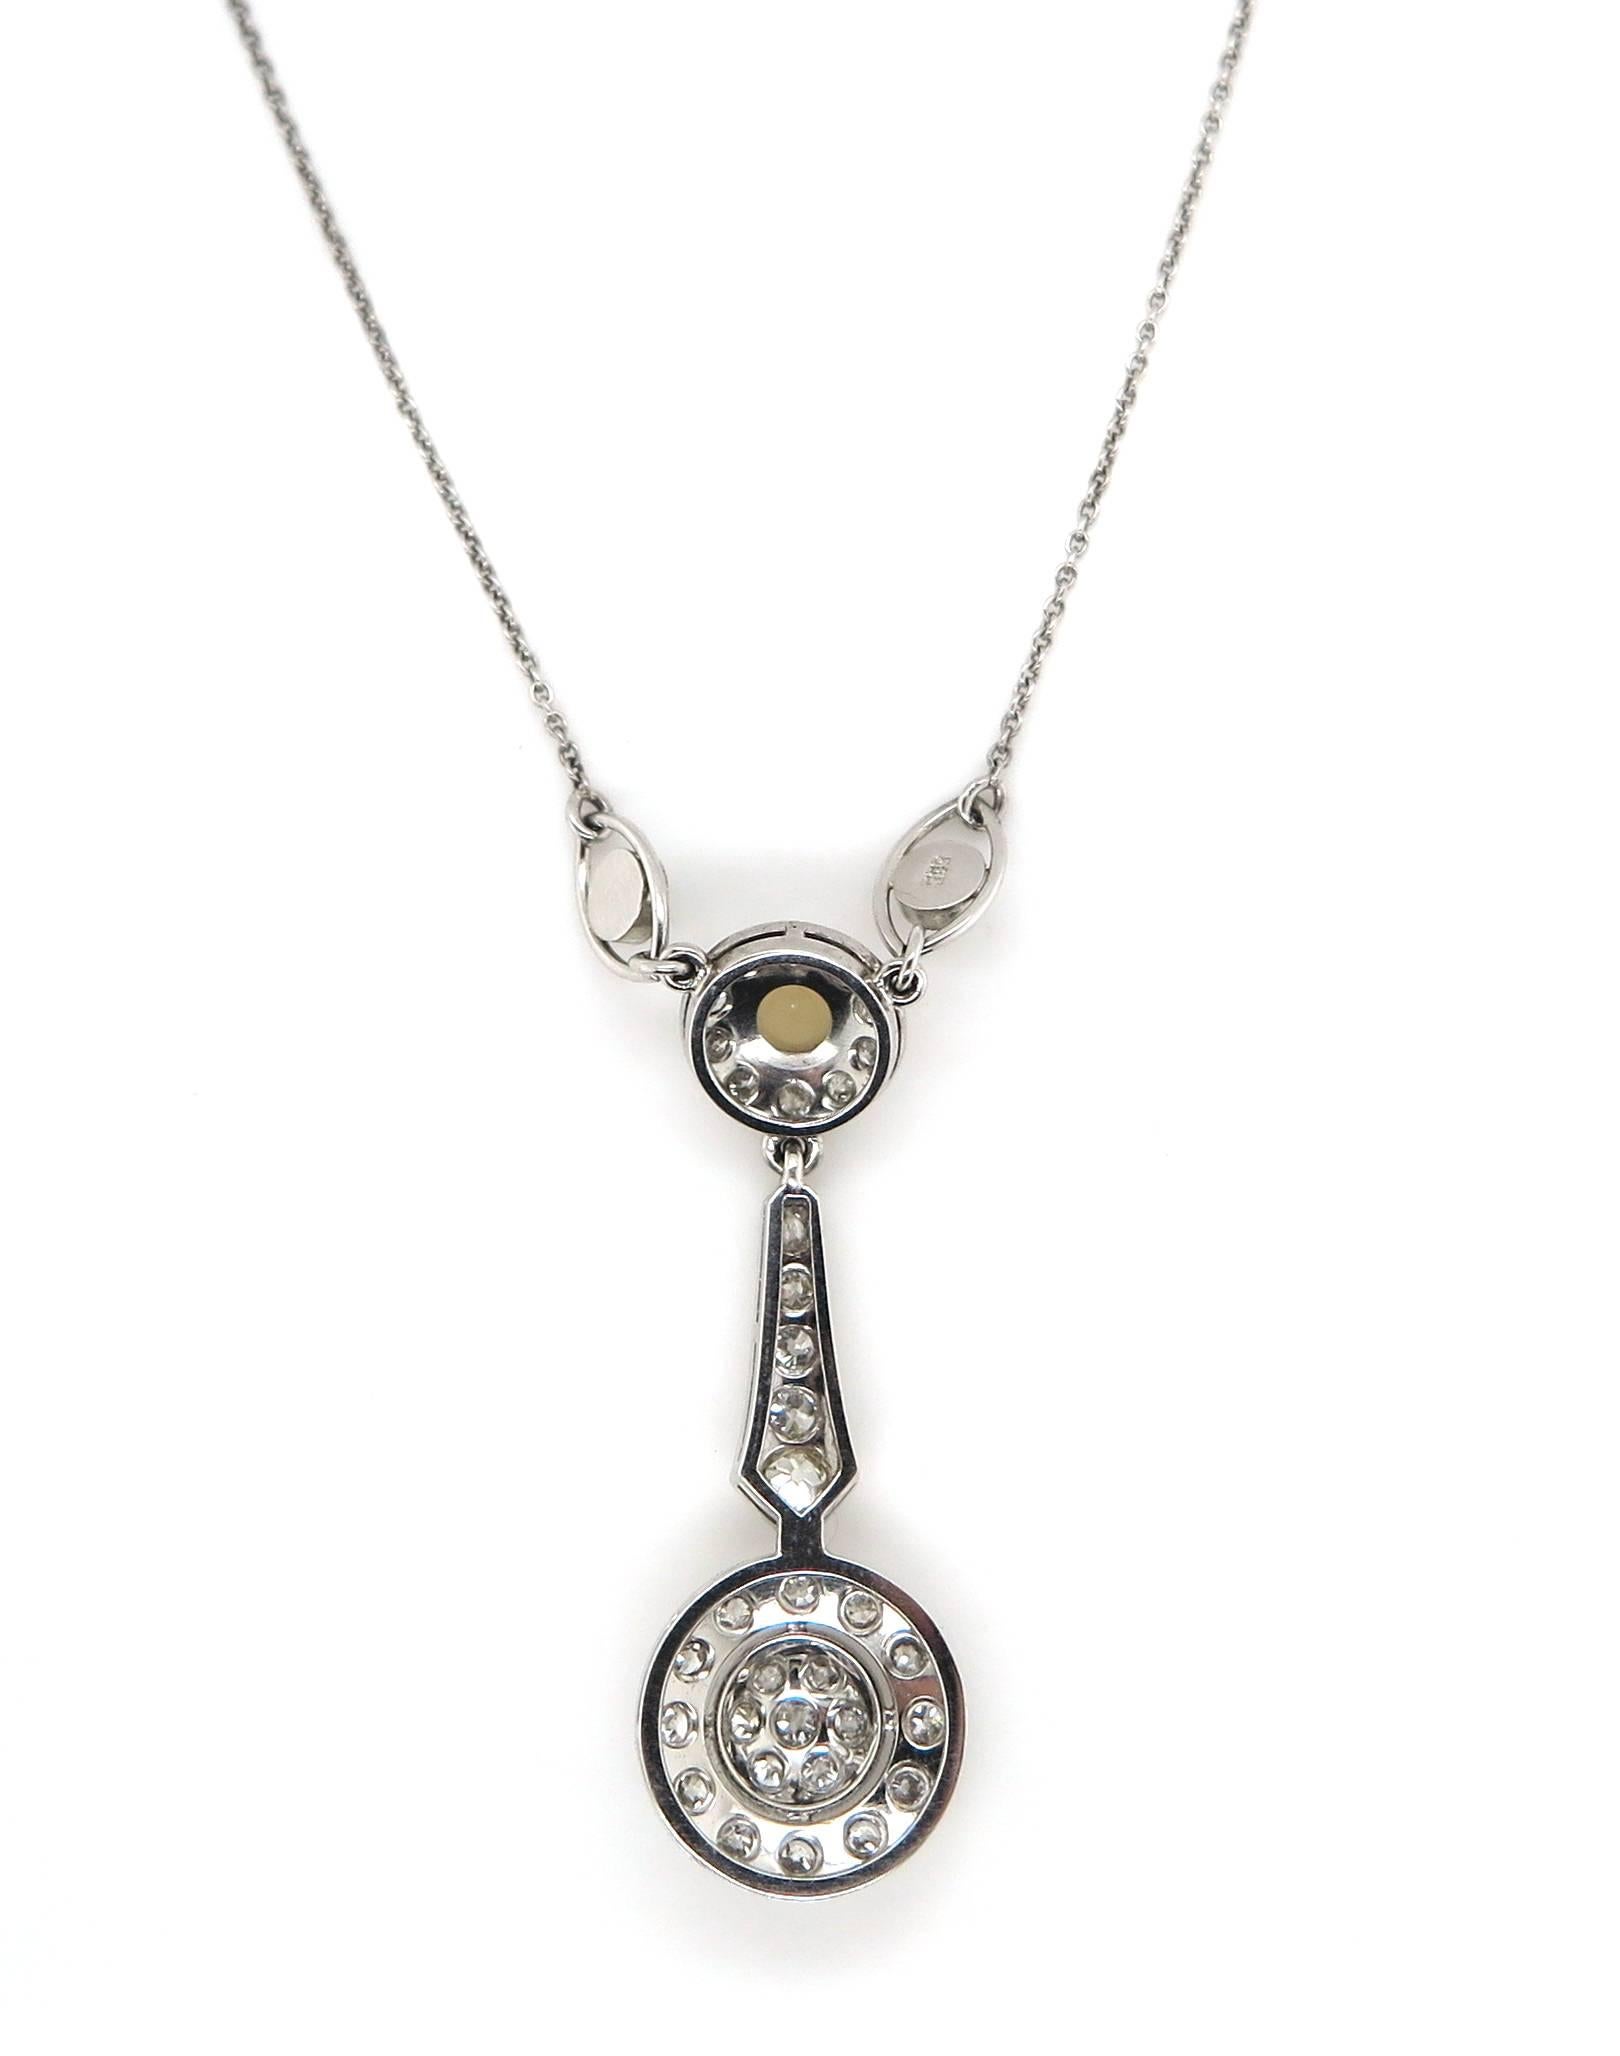 Featuring a unique antique seed pearl diamond pendant set in three vintage seed pearls and 34 Old European cut diamonds totalling to 0.95 carat crafted in 14K White Gold. The unique design is pertinent to the 1920's era depicting pierced decorated